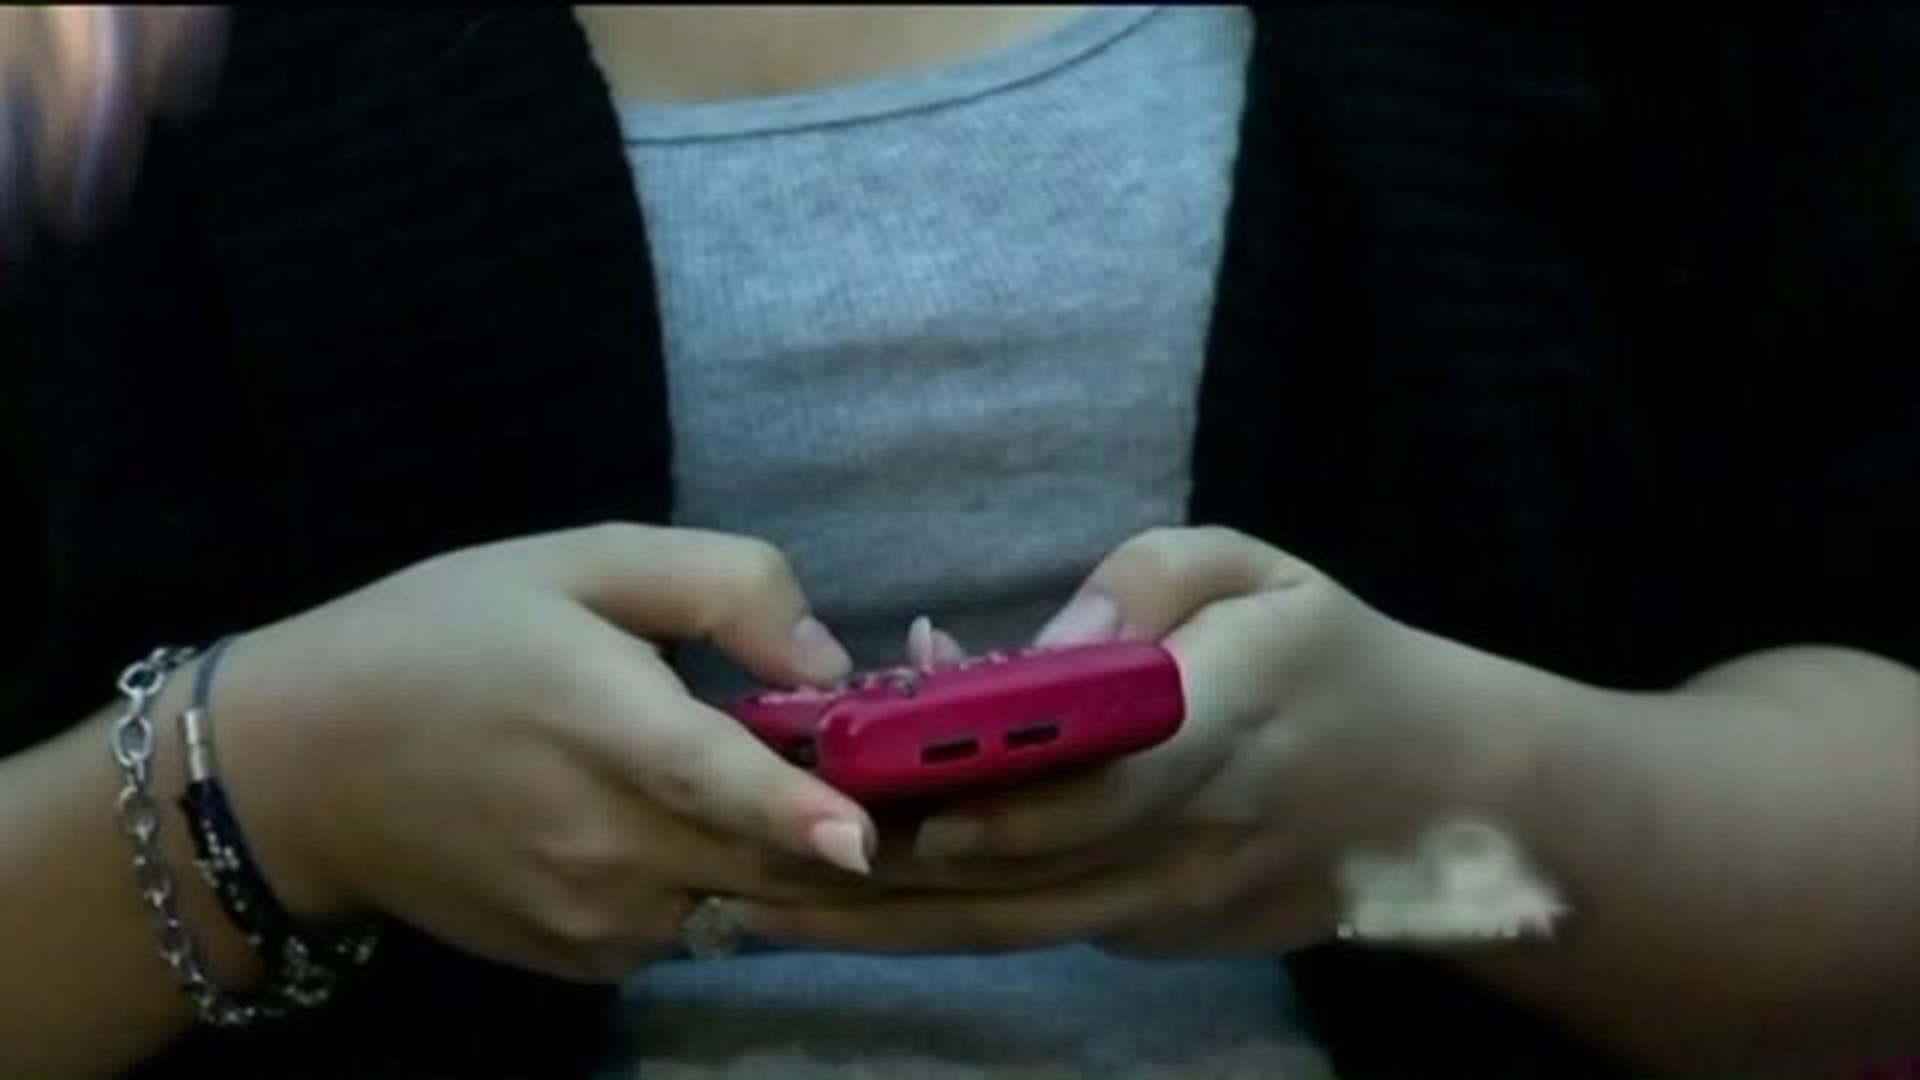 Legal Teen - Sexting or child porn? Naugatuck teen faces legal issues after sending  explicit photos of herself | fox61.com